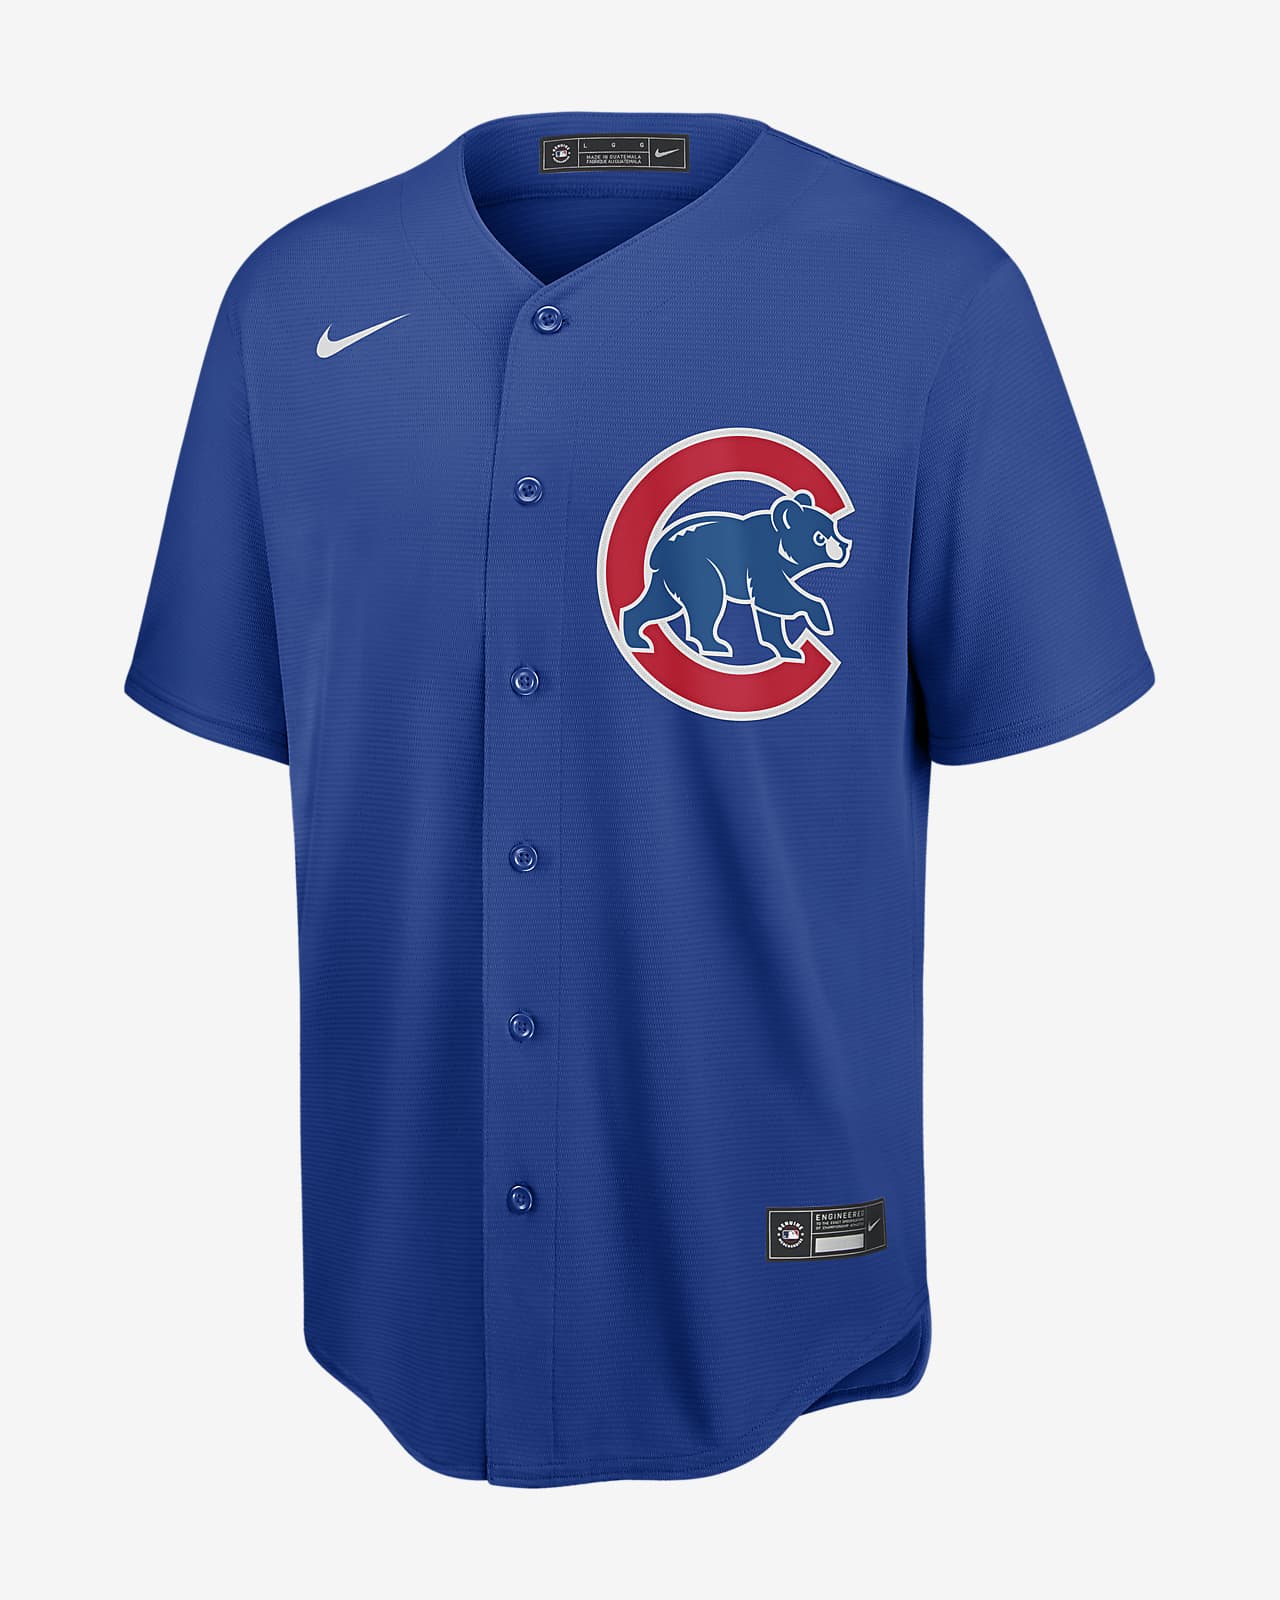 chicago cubs kris bryant jersey